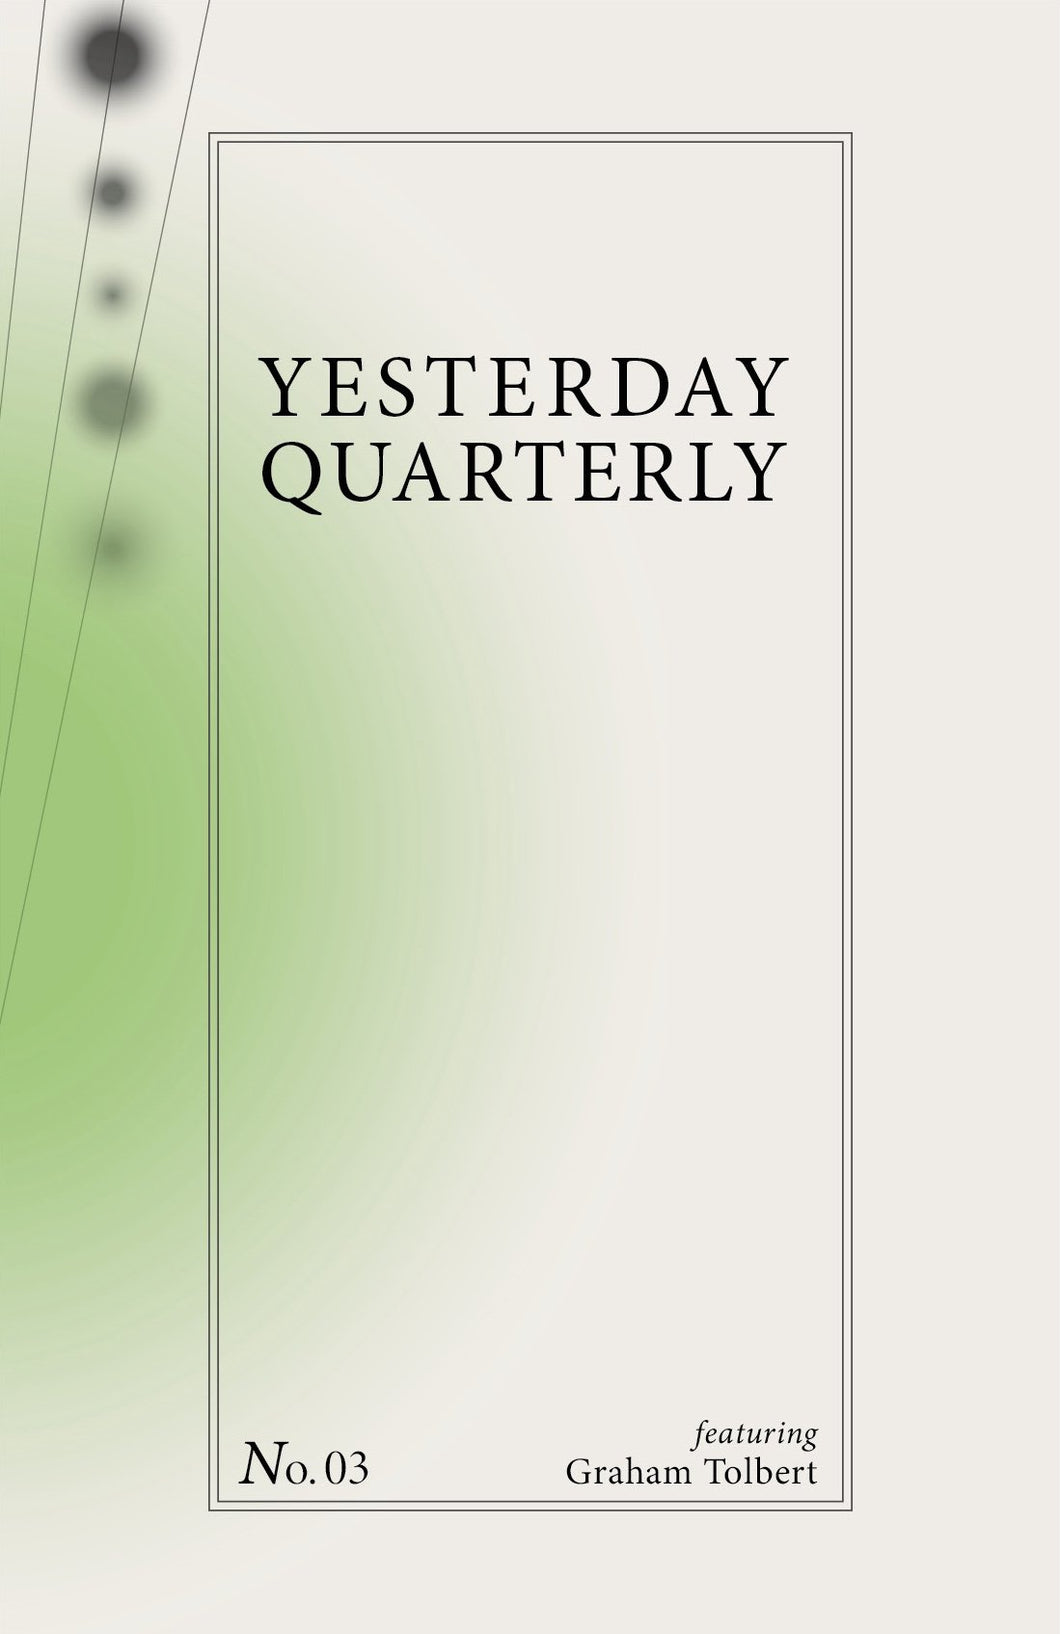 Yesterday Quarterly No.3: A Collaboration between Elizabeth de Cleyre & Read Write Books featuring Graham Tolbert